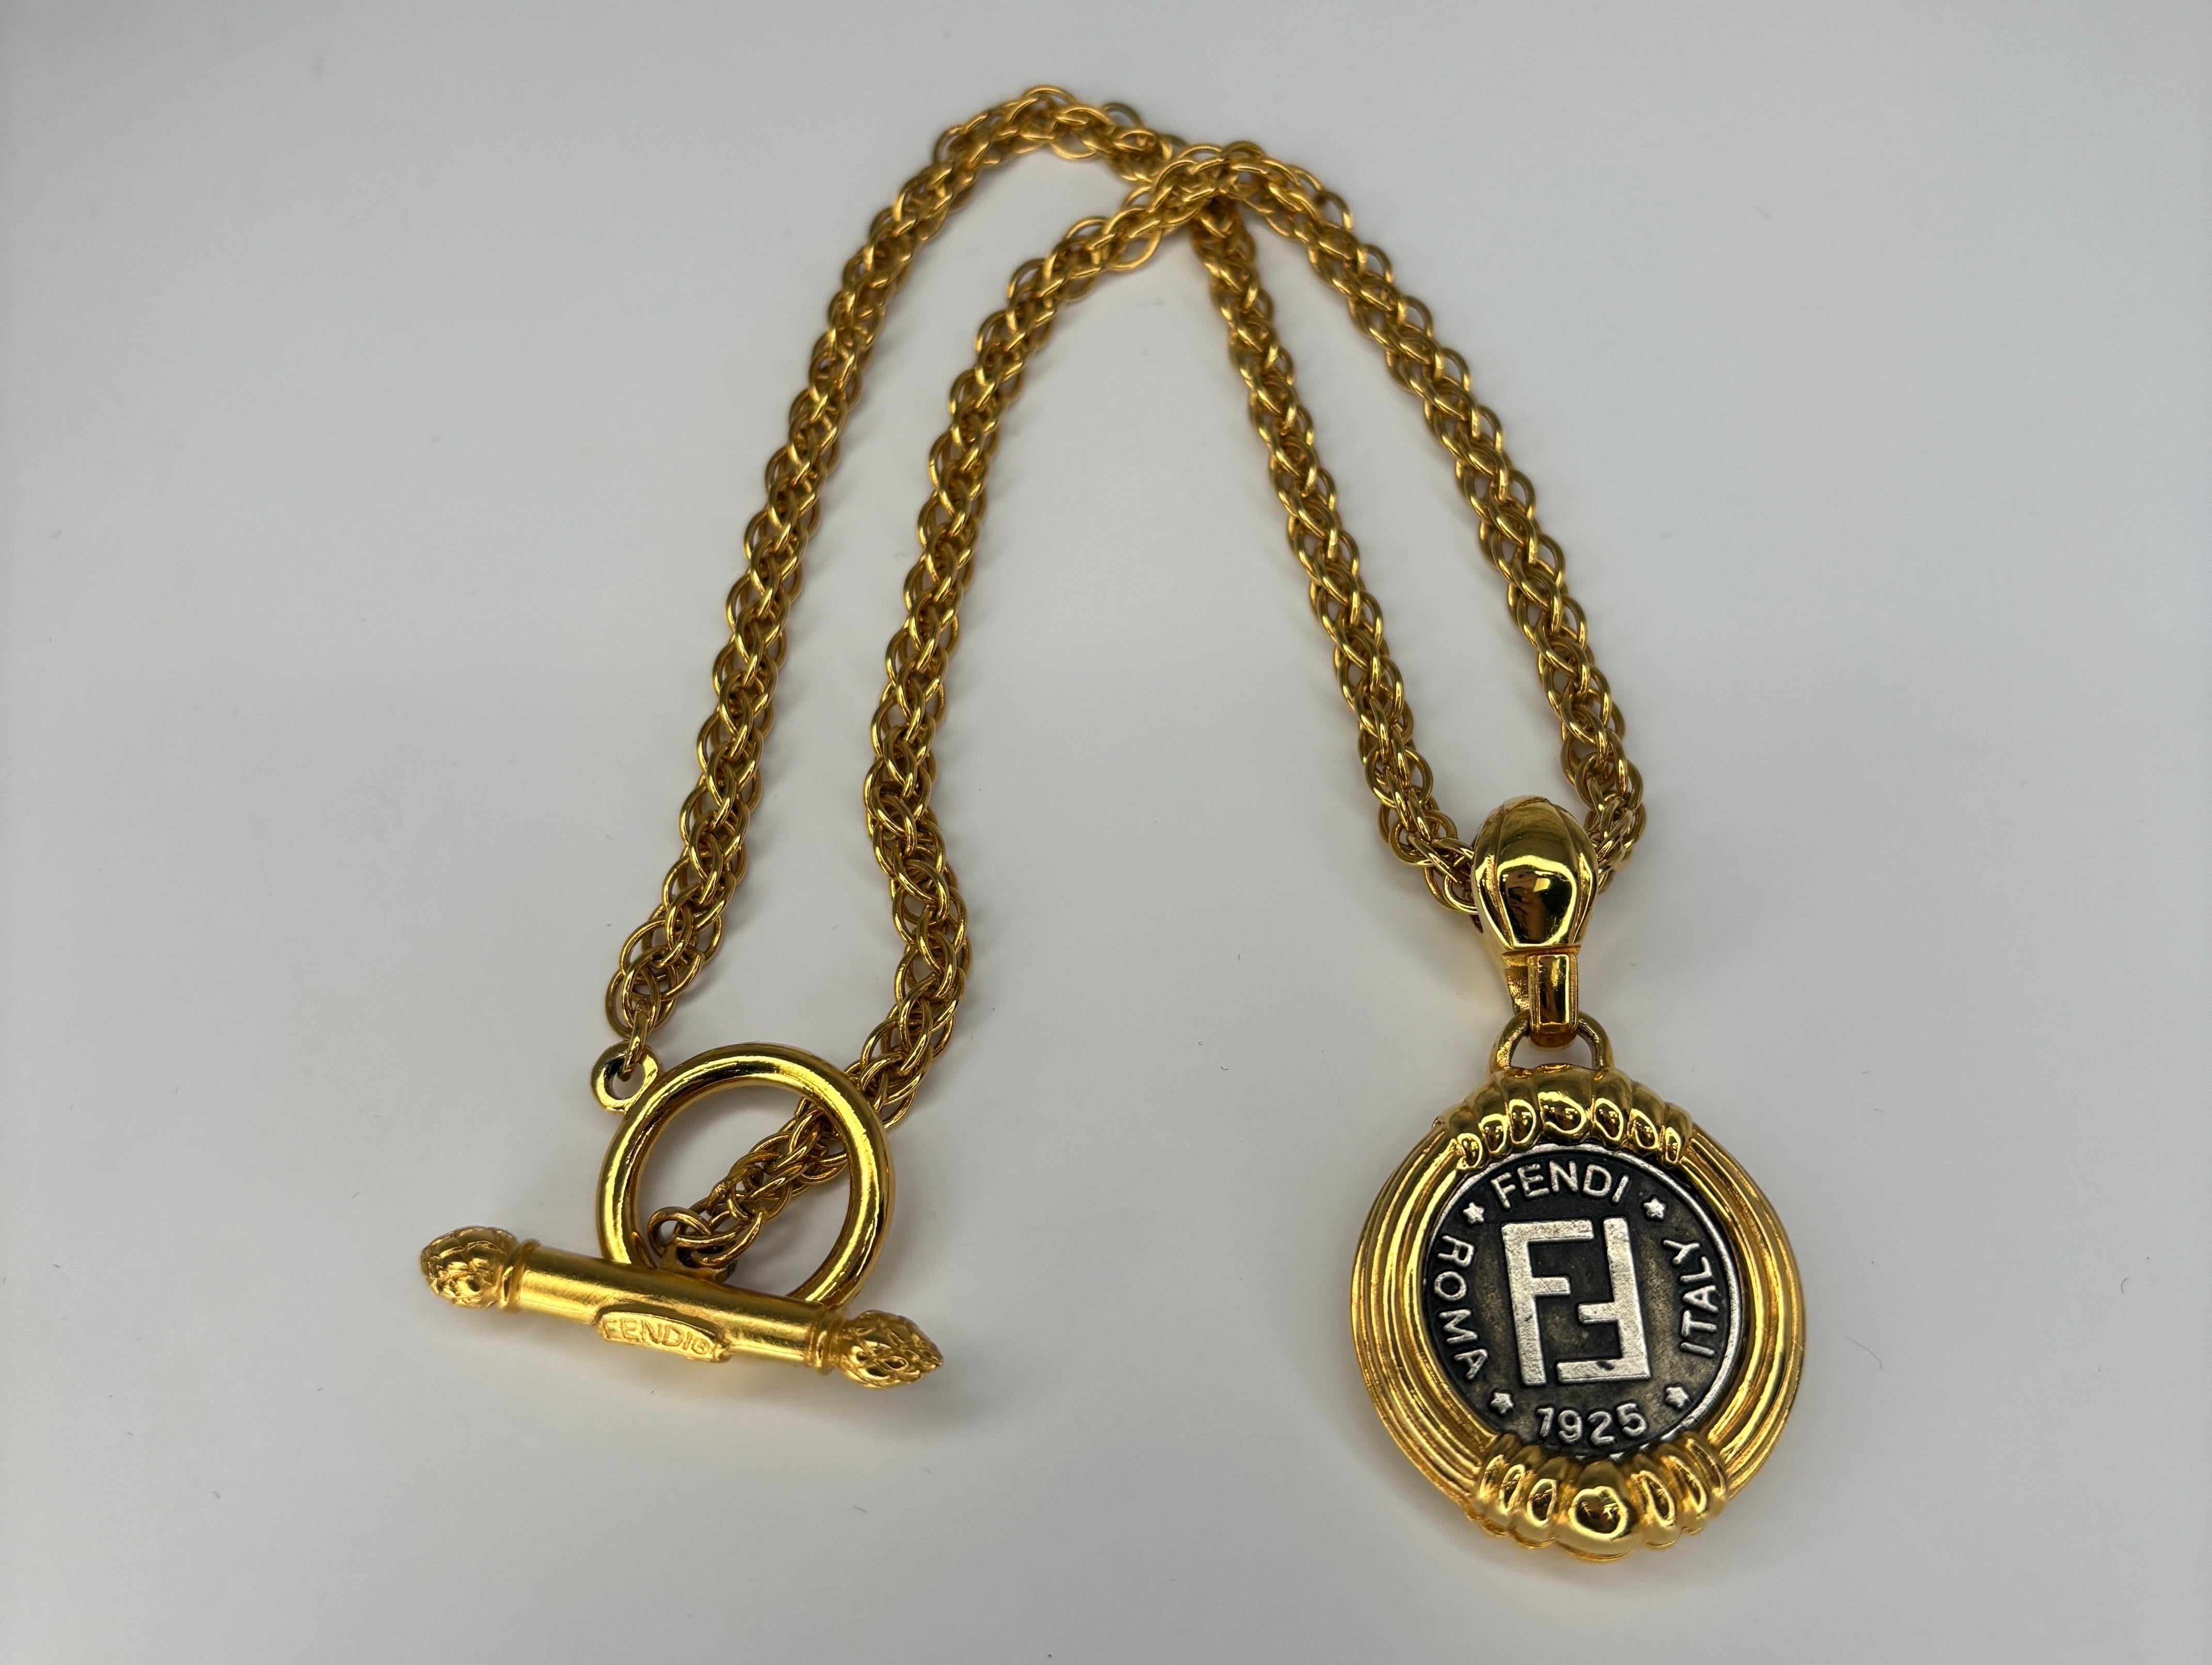 This Fendi's Coin Pendant Necklace is a distinctive piece from the renowned Italian luxury fashion house known for its elegance, craftsmanship, and innovation. The centerpiece of this necklace is a coin pendant featuring double-sided designs, which